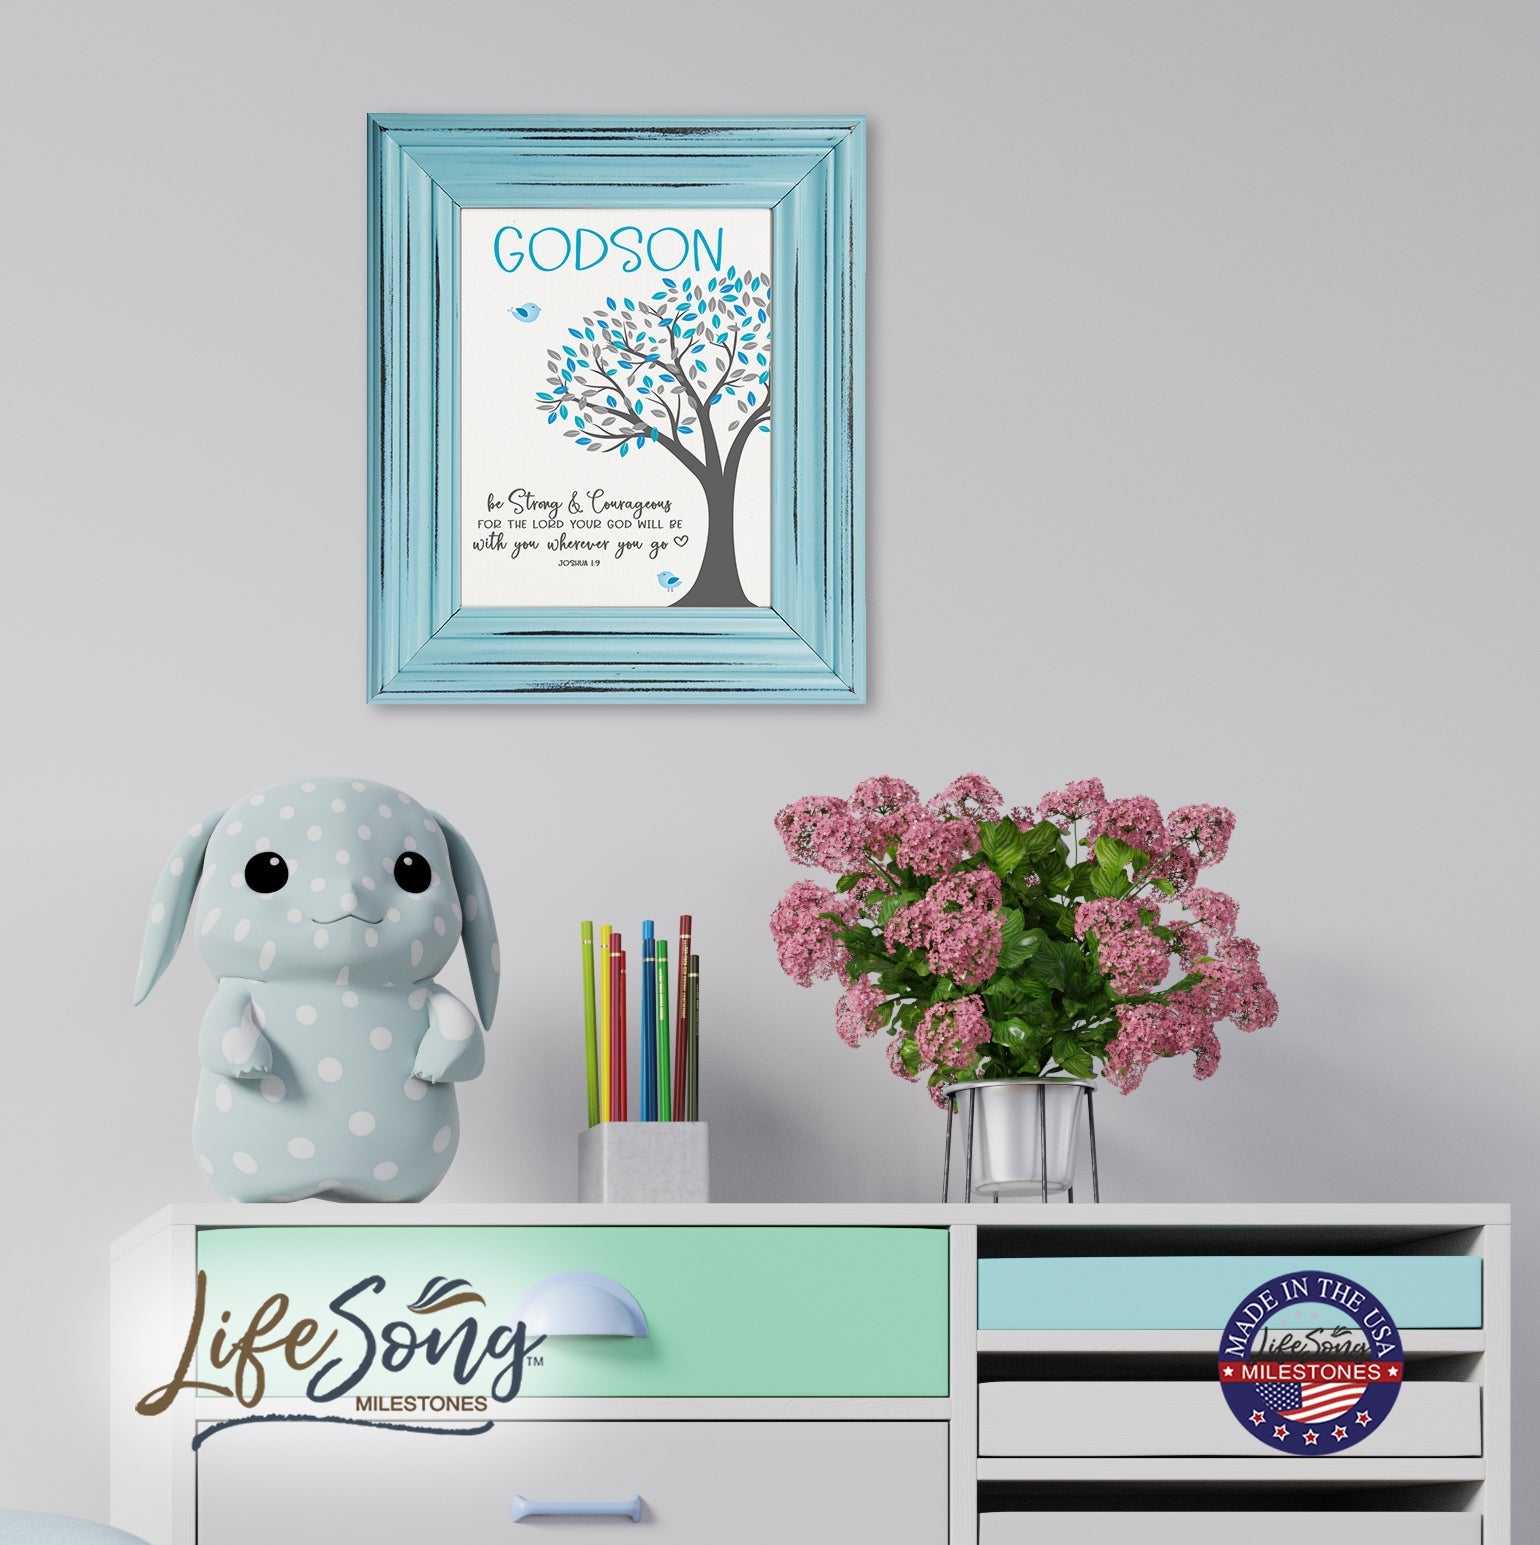 Godchild Framed Wall Signs - Be Strong - LifeSong Milestones